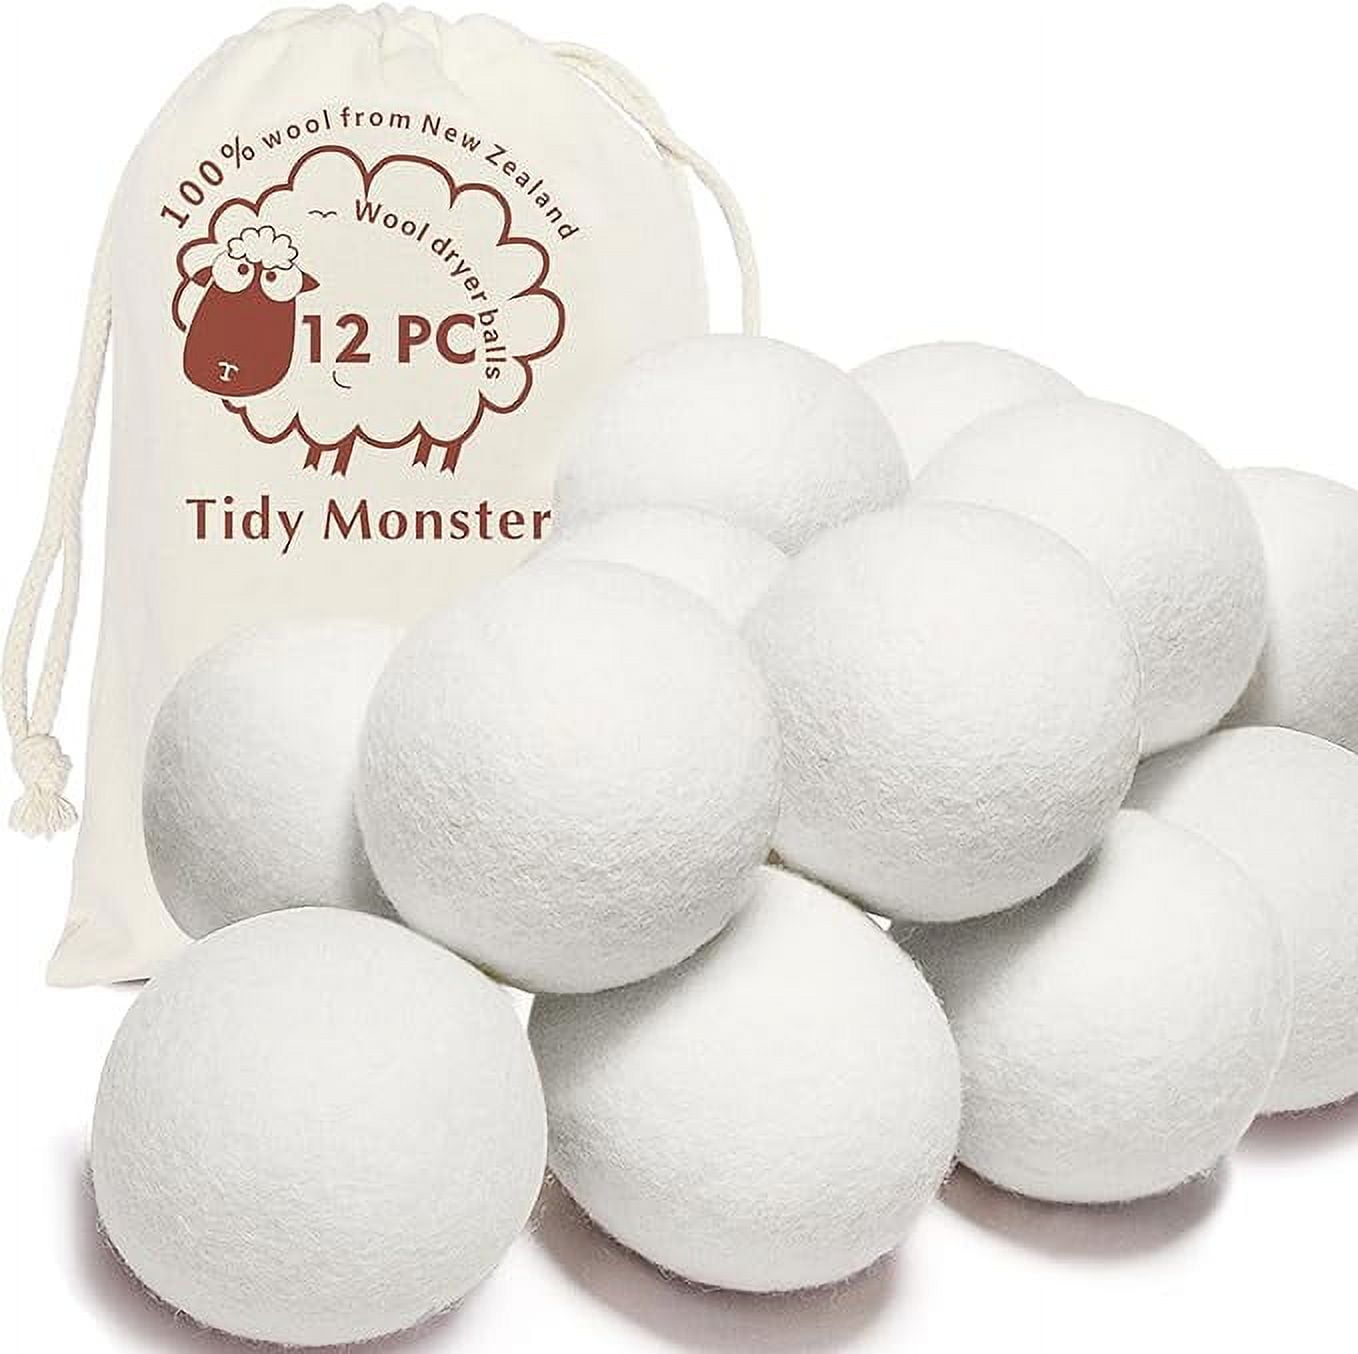 Woolzies Wool Dryer Balls Organic: 6 XL Laundry Balls for Dryer + 10 ml  Lavender Essential Oil Combo for use as 100% Pure and Natural Fabric  Softener